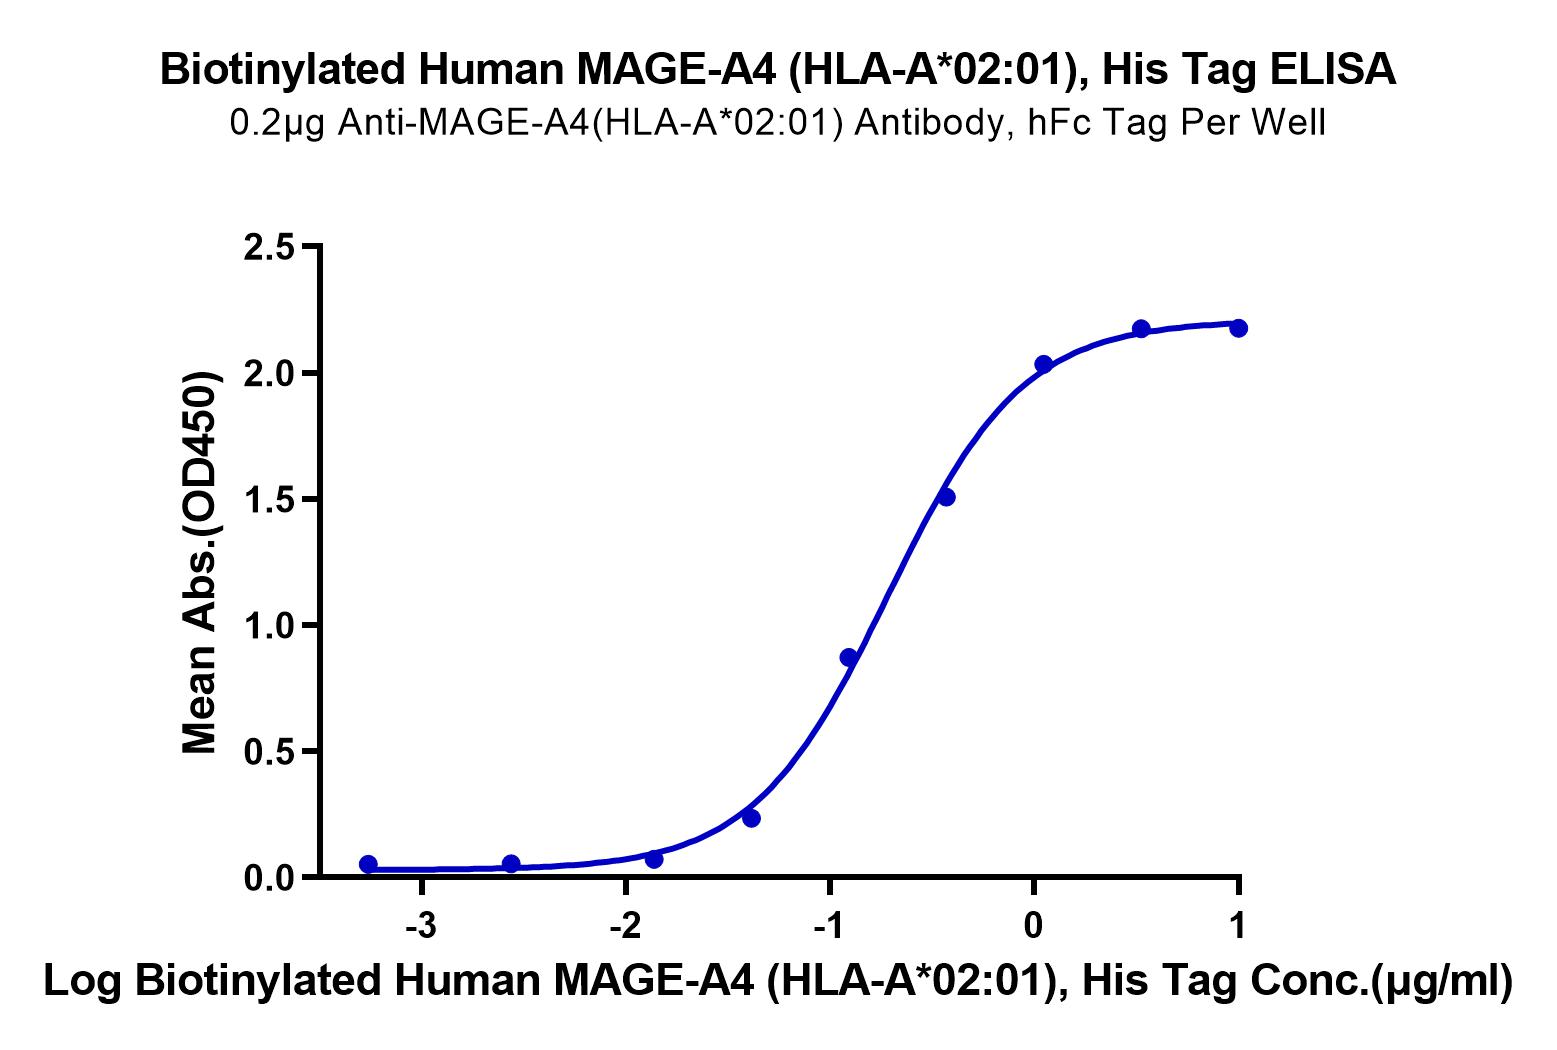 Biotinylated Human MAGE-A4 (HLA-A*02:01) Protein (LTP10684)